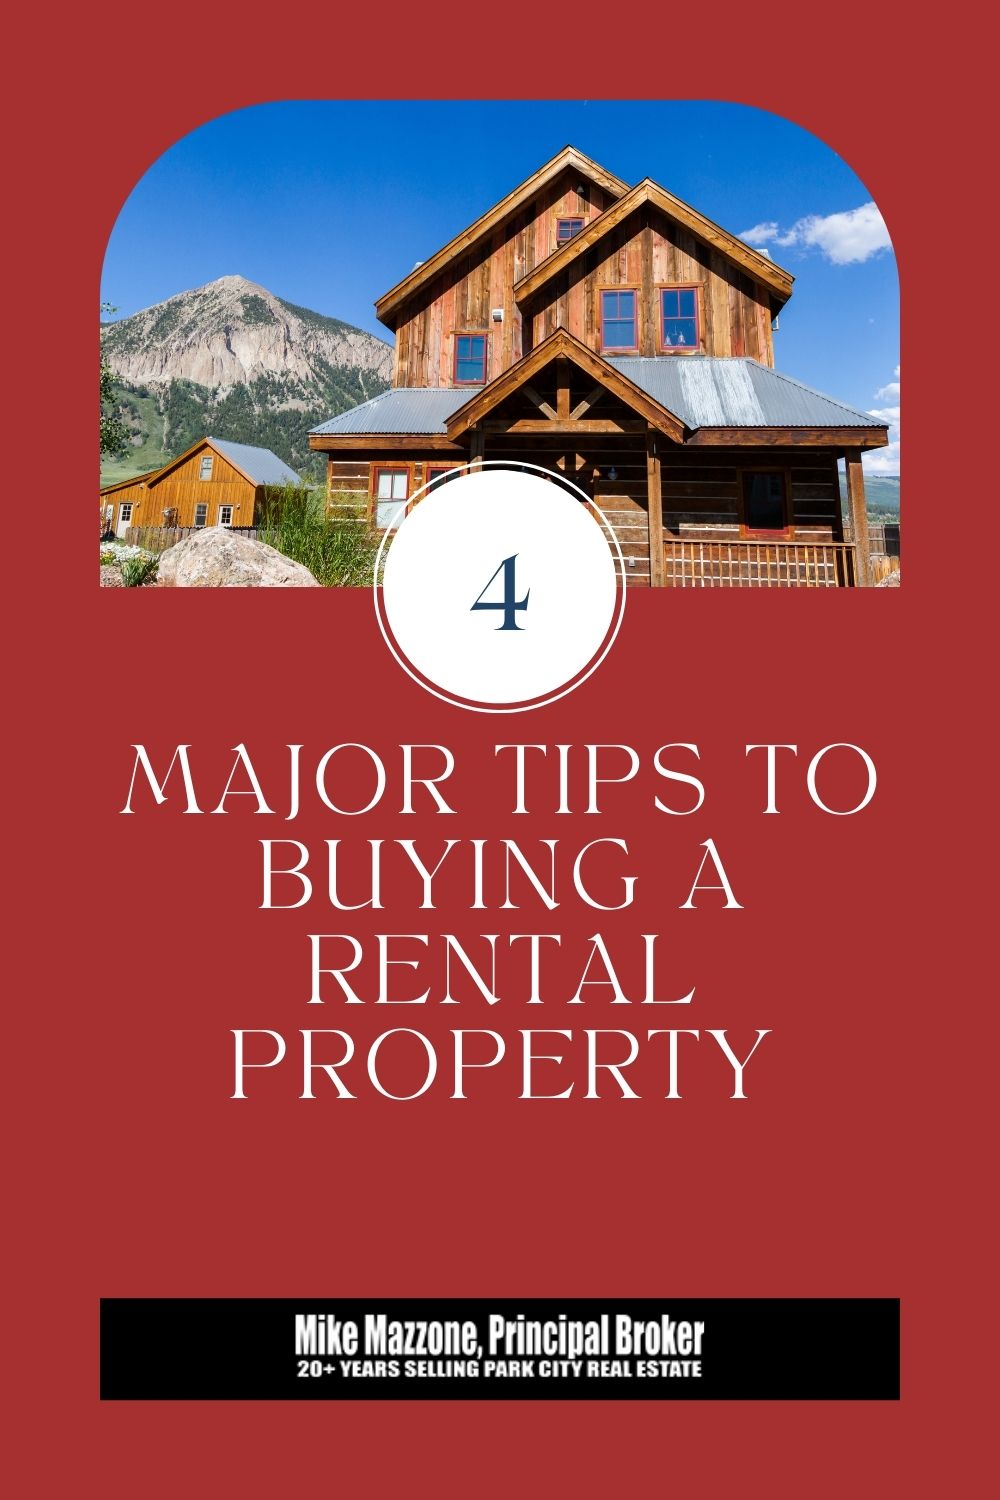 4 Major Tips to Buying a Rental Property